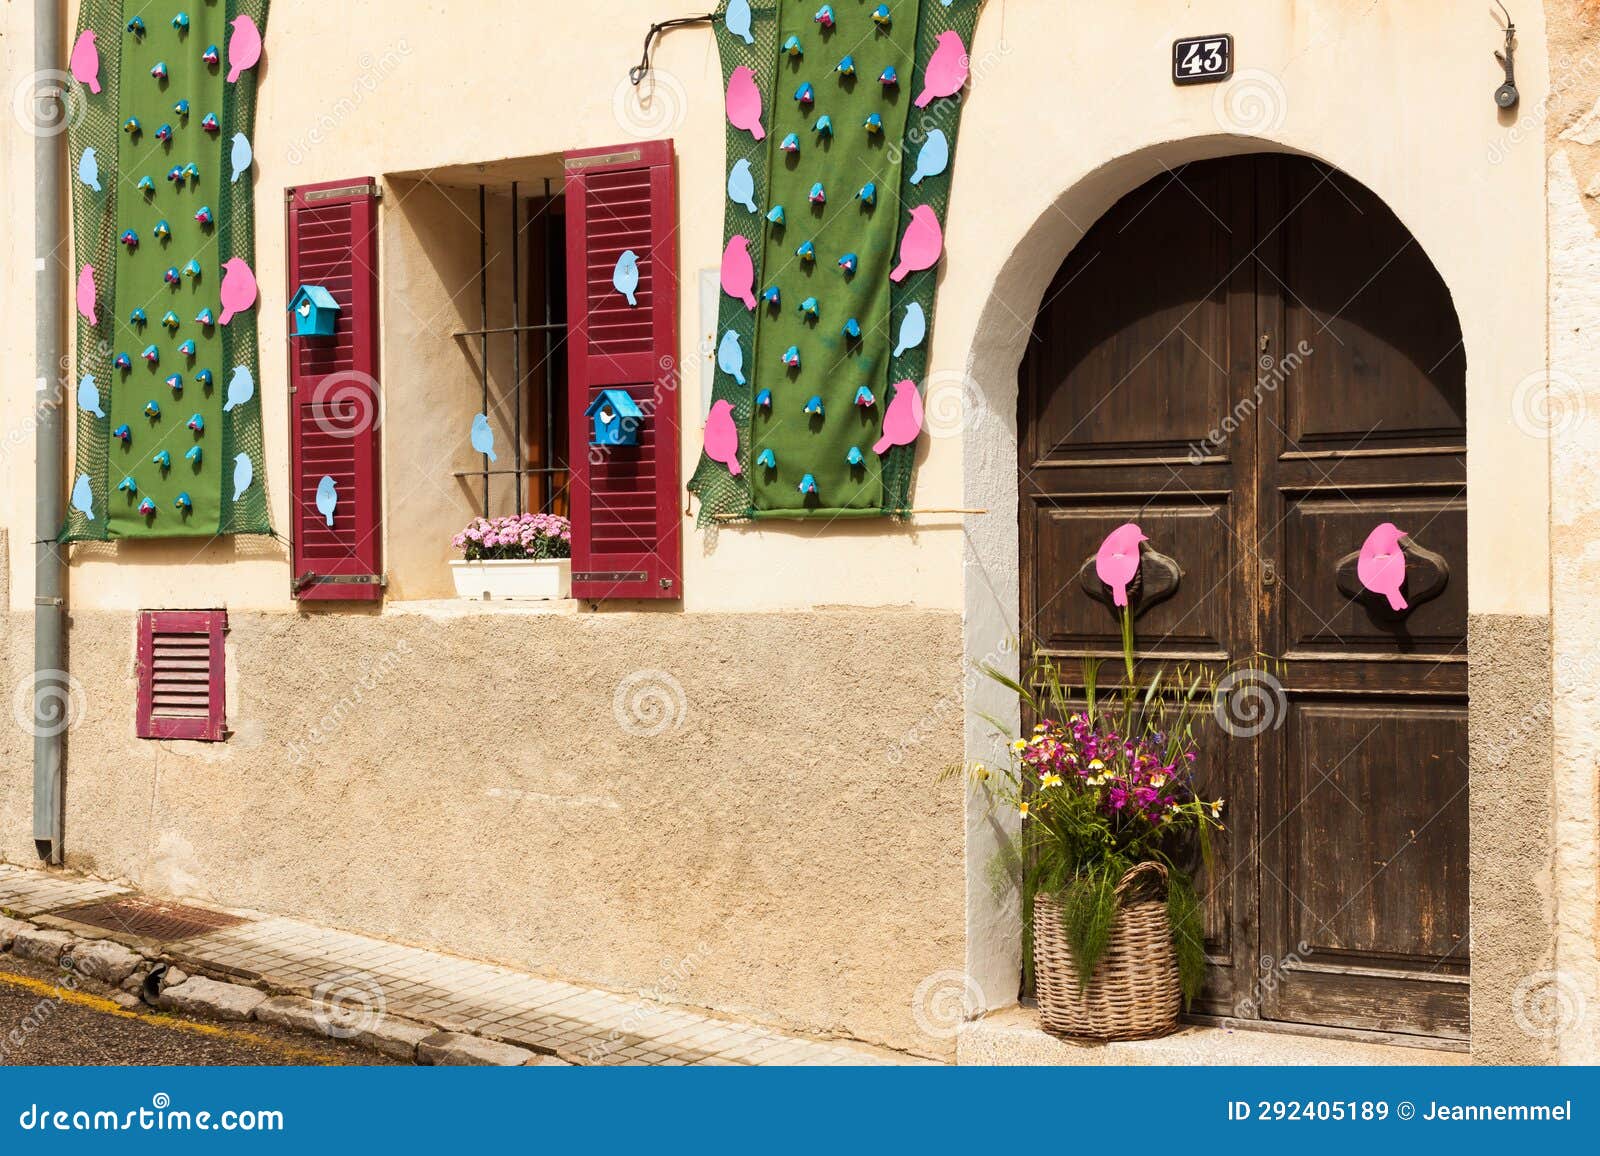 house, decorated with pink and blue birds on 